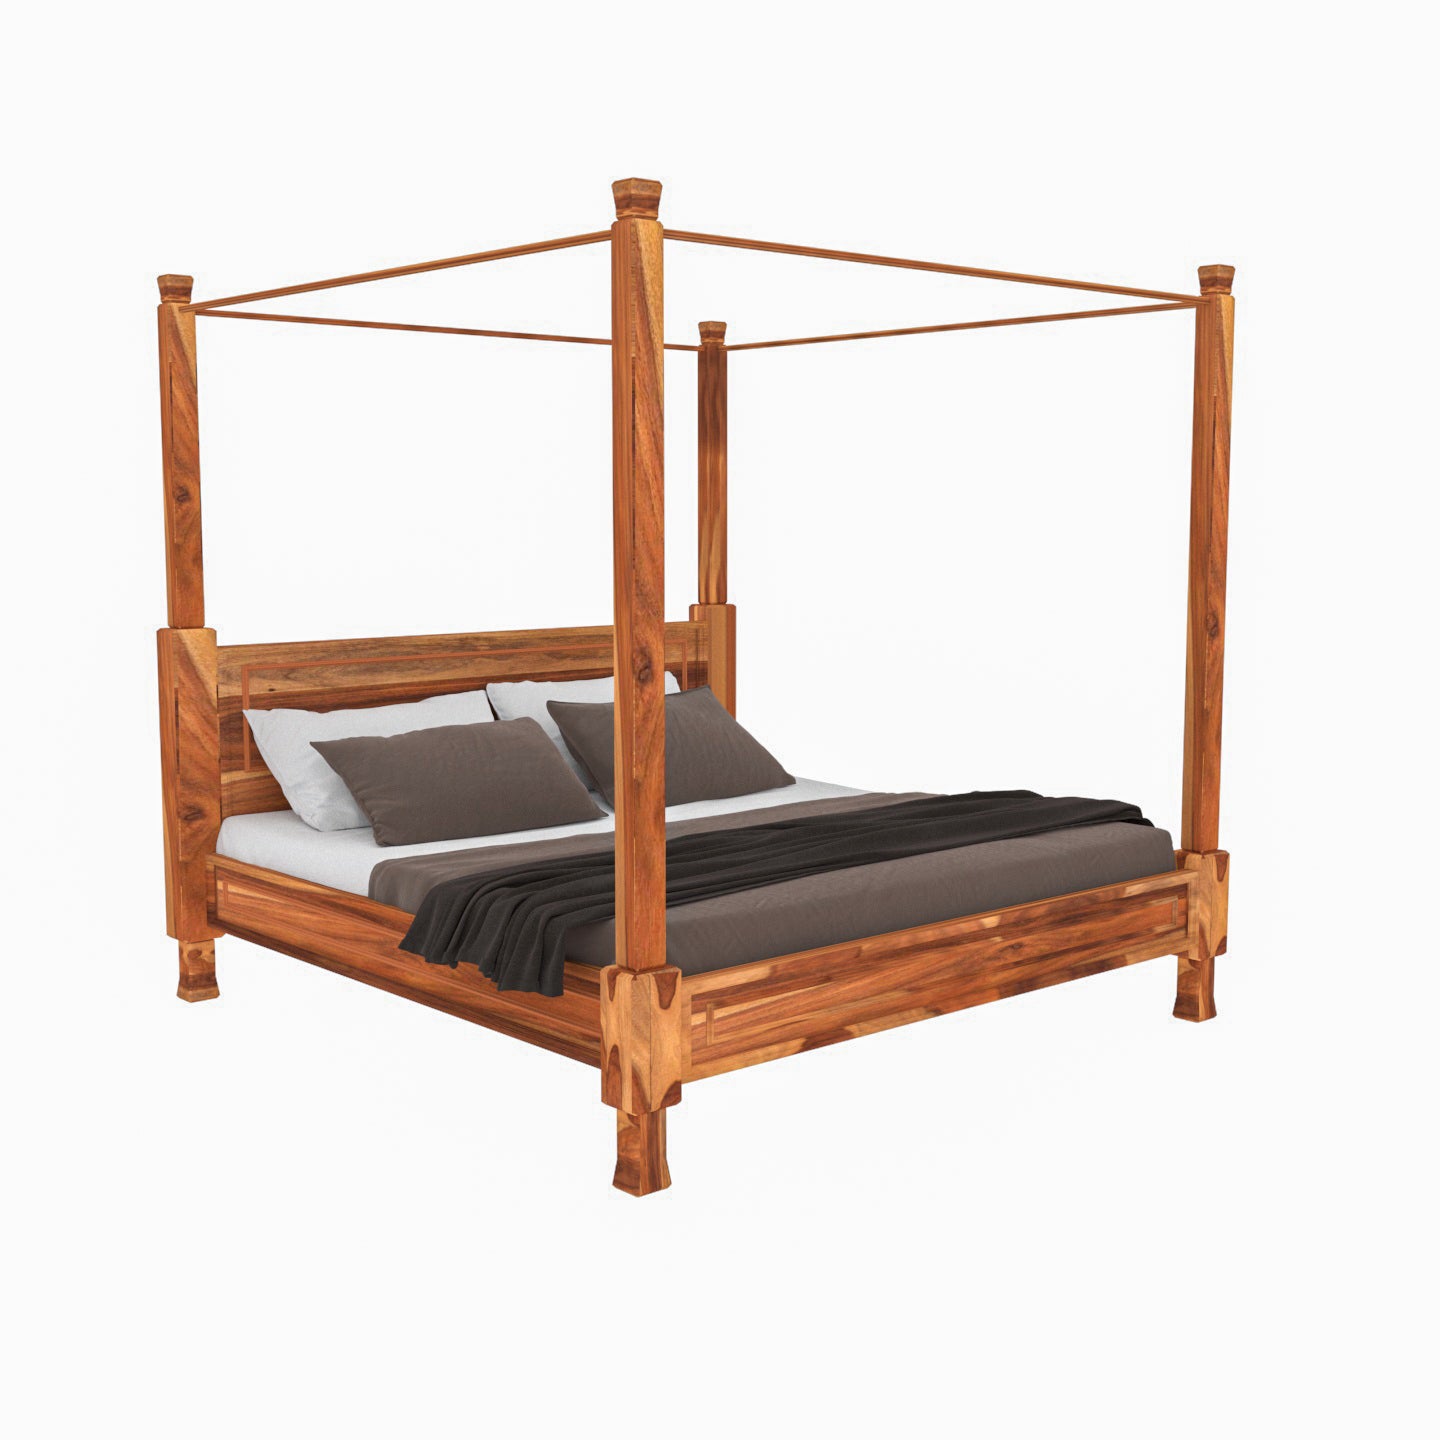 Classic Heritage Look Long Pillar Roof Wooden Vintage Bed Bed